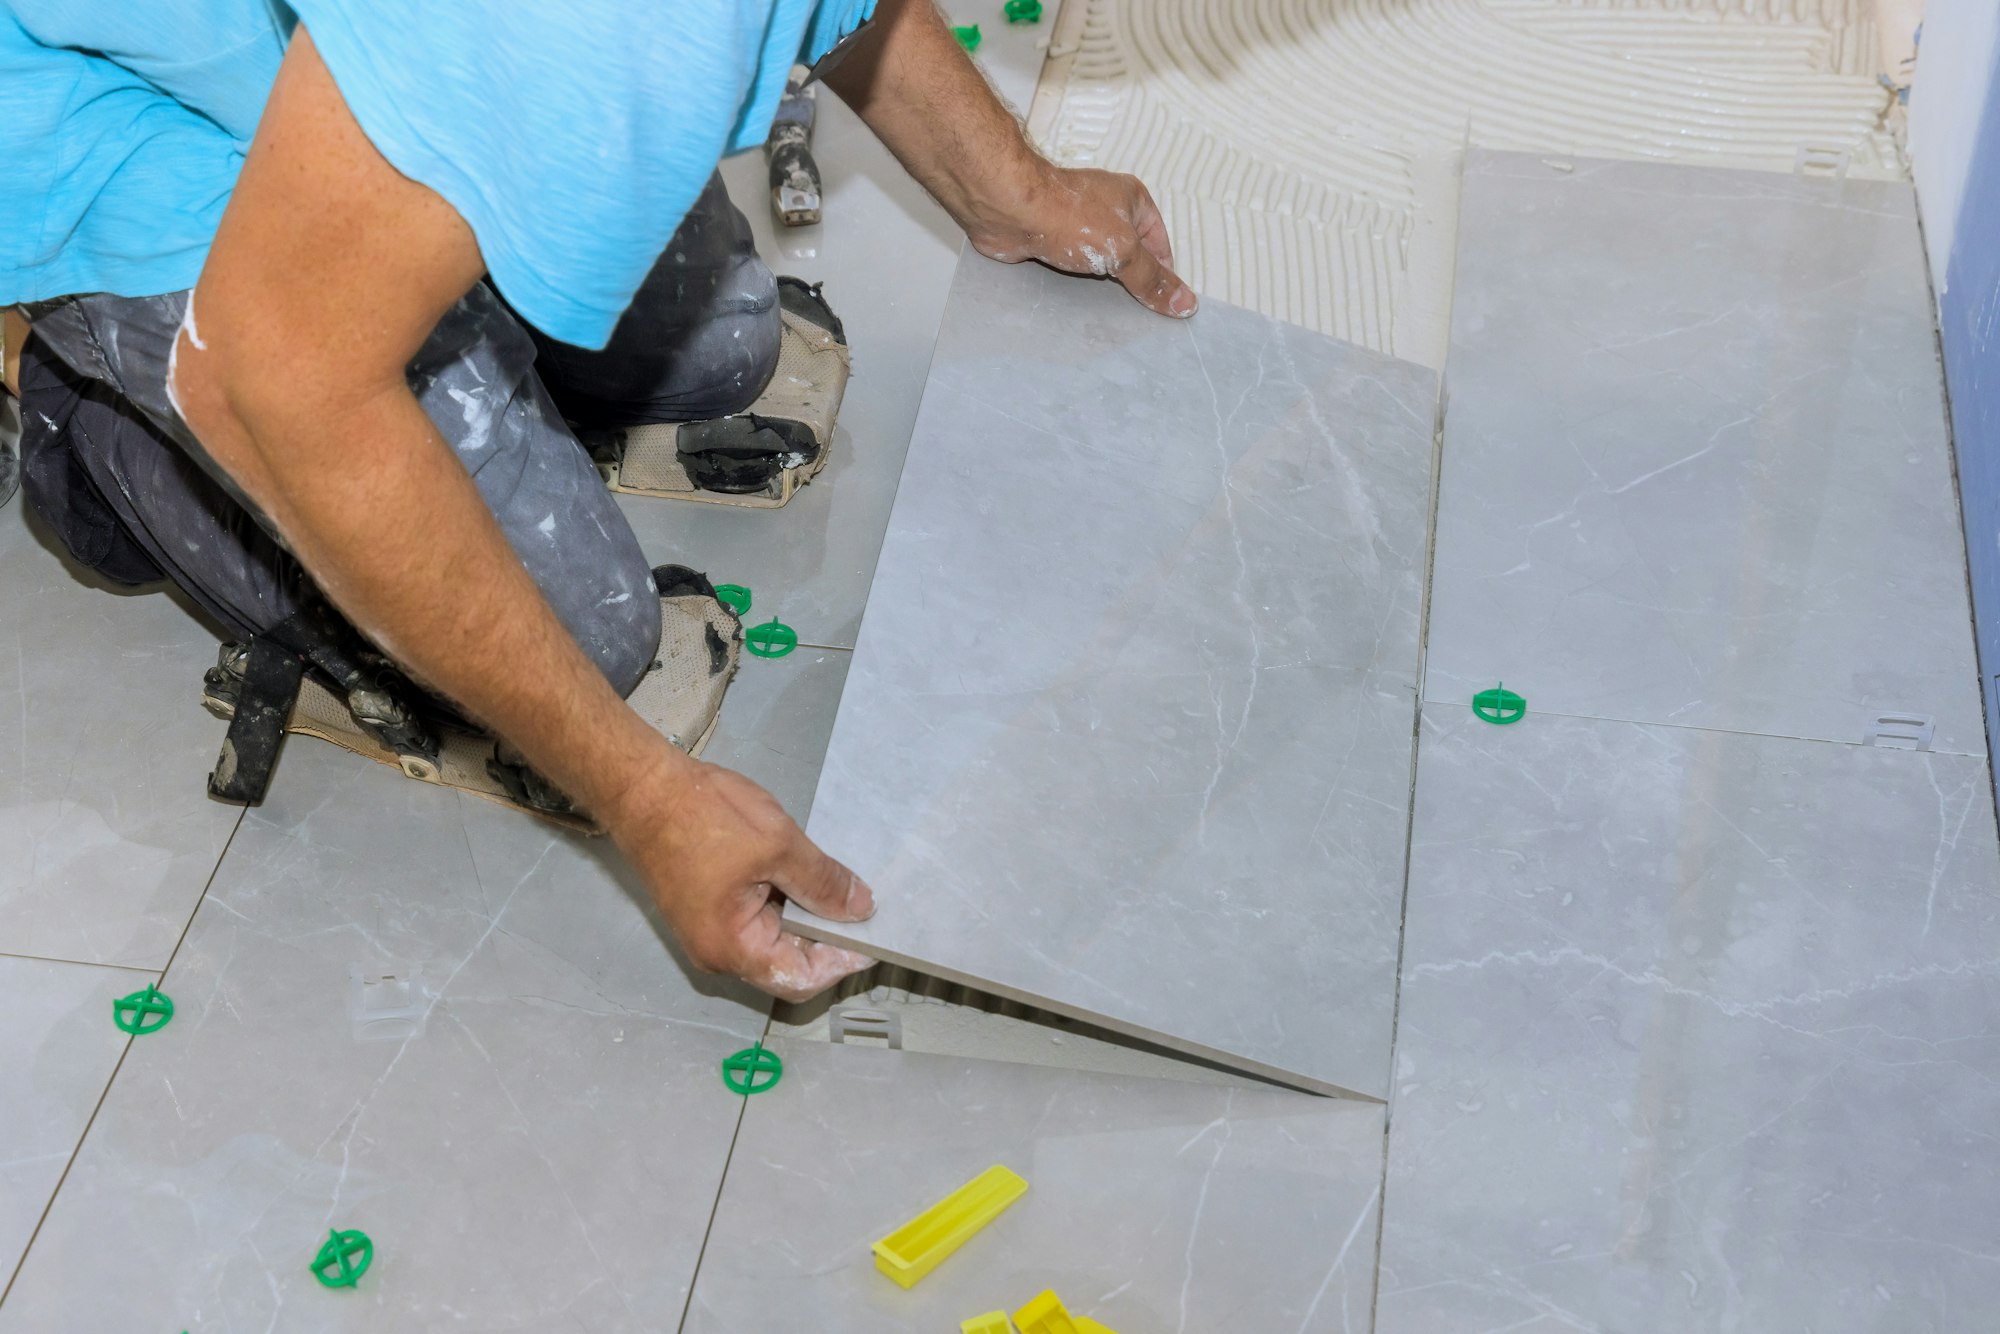 Tiler worker lay large tiles on ceramic floor tile over a mortar adhesive